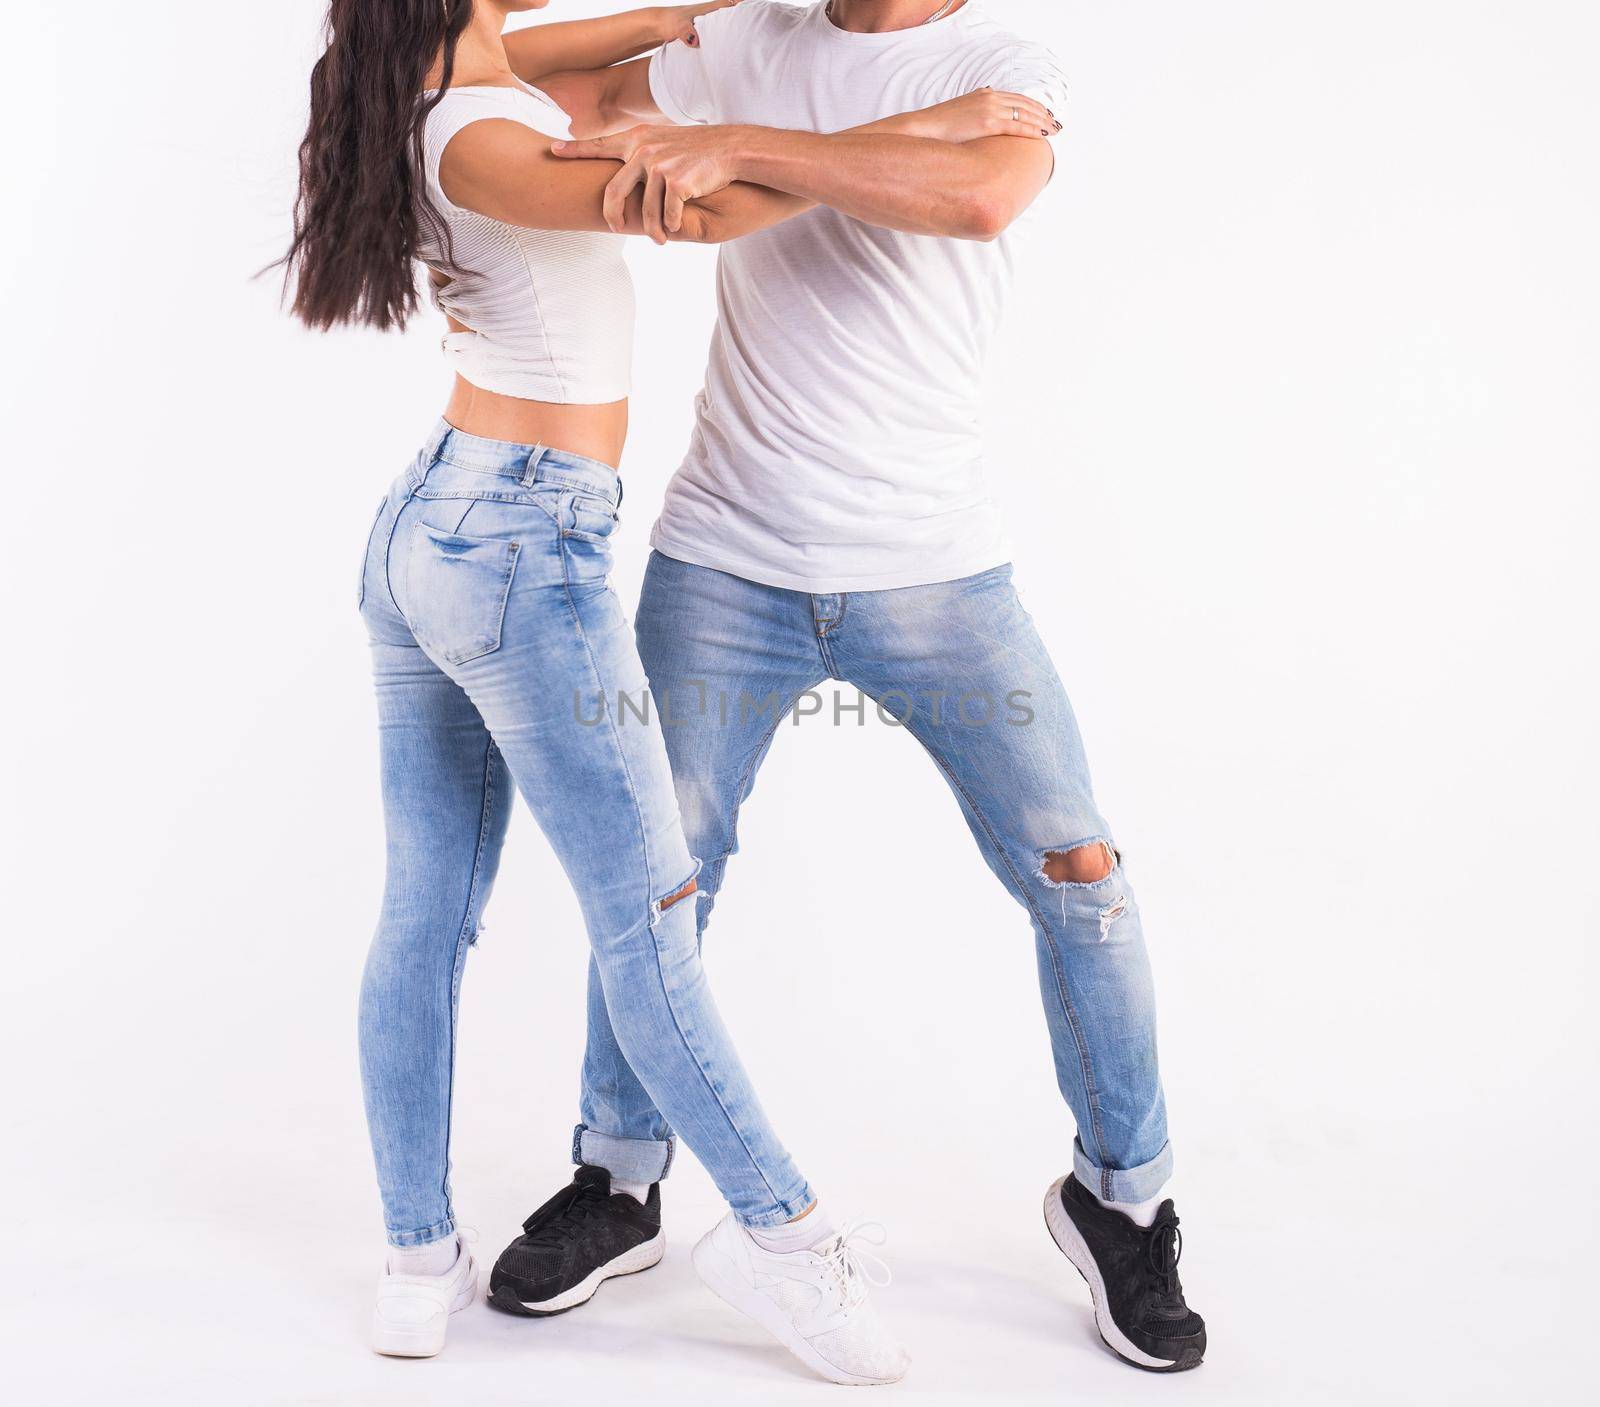 Salsa, kizomba and bachata dancers close up on white background. Social dance concept by Satura86